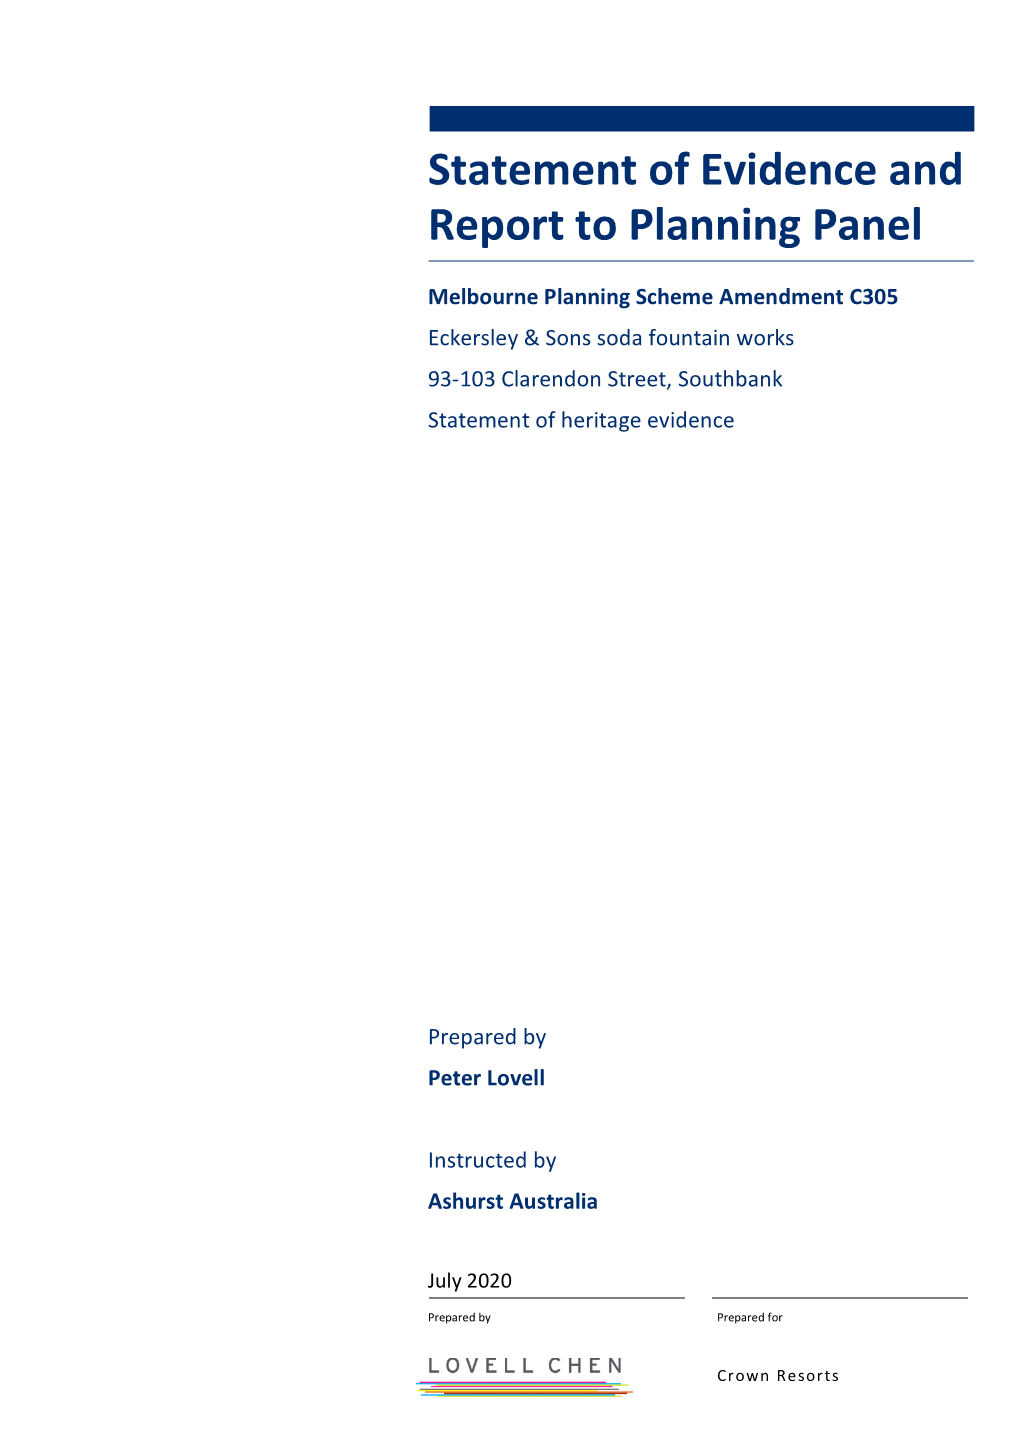 Statement of Evidence and Report to Planning Panel